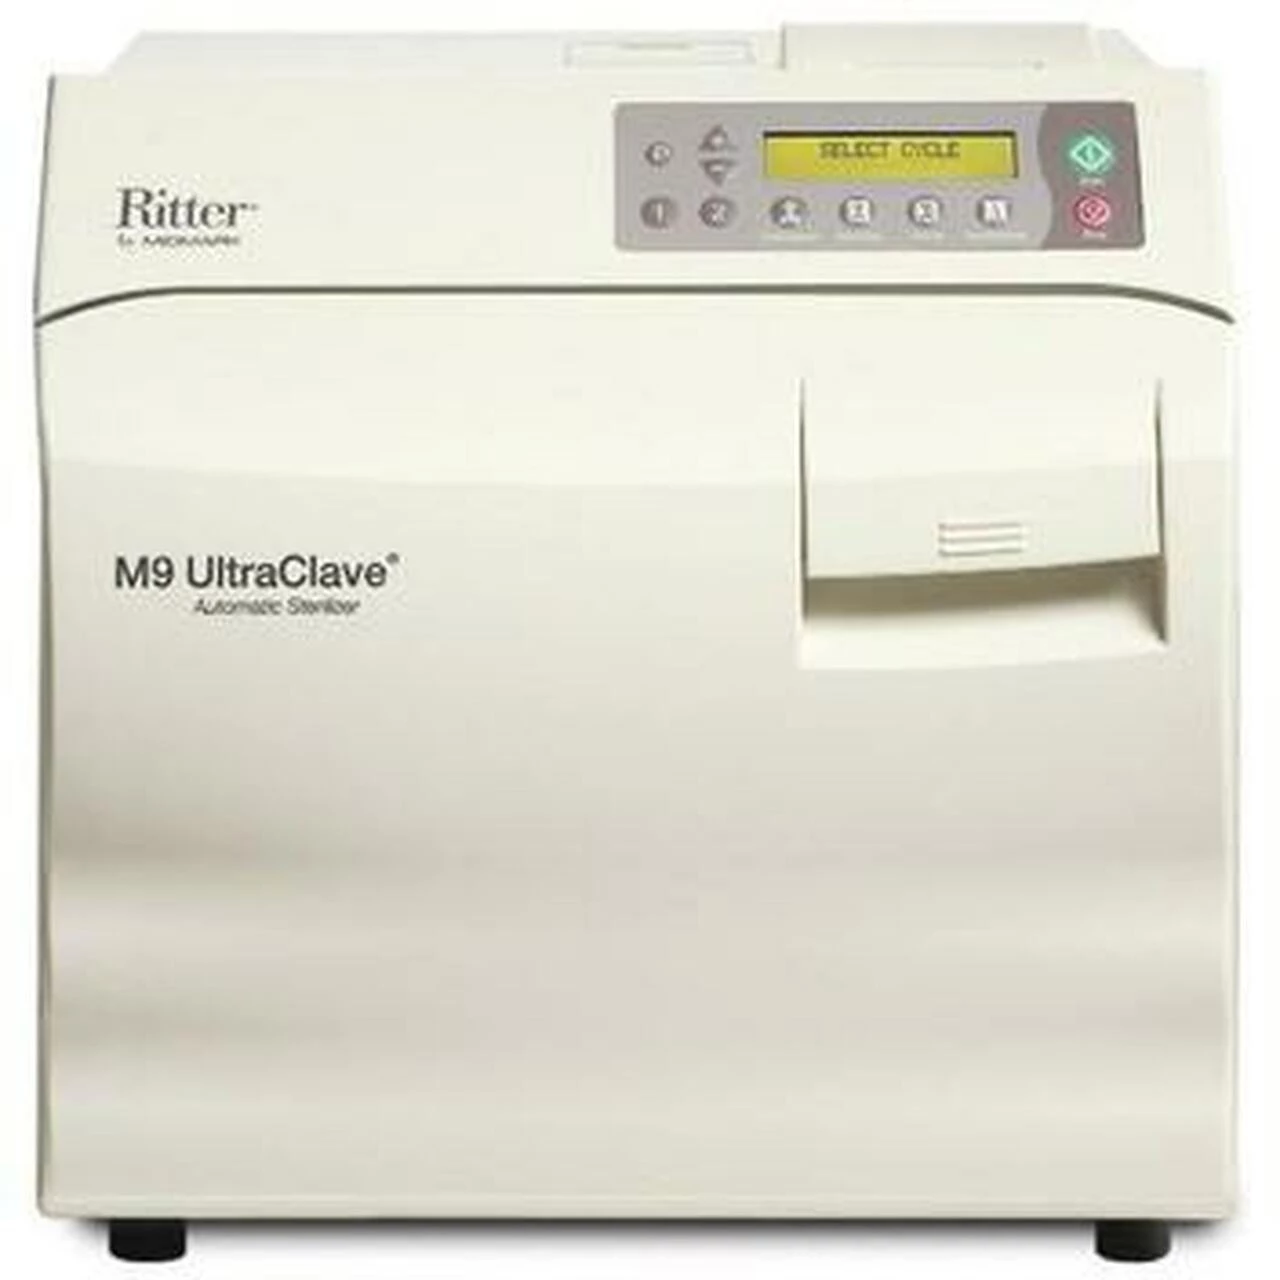 Ritter M9 UltraClave Autoclave